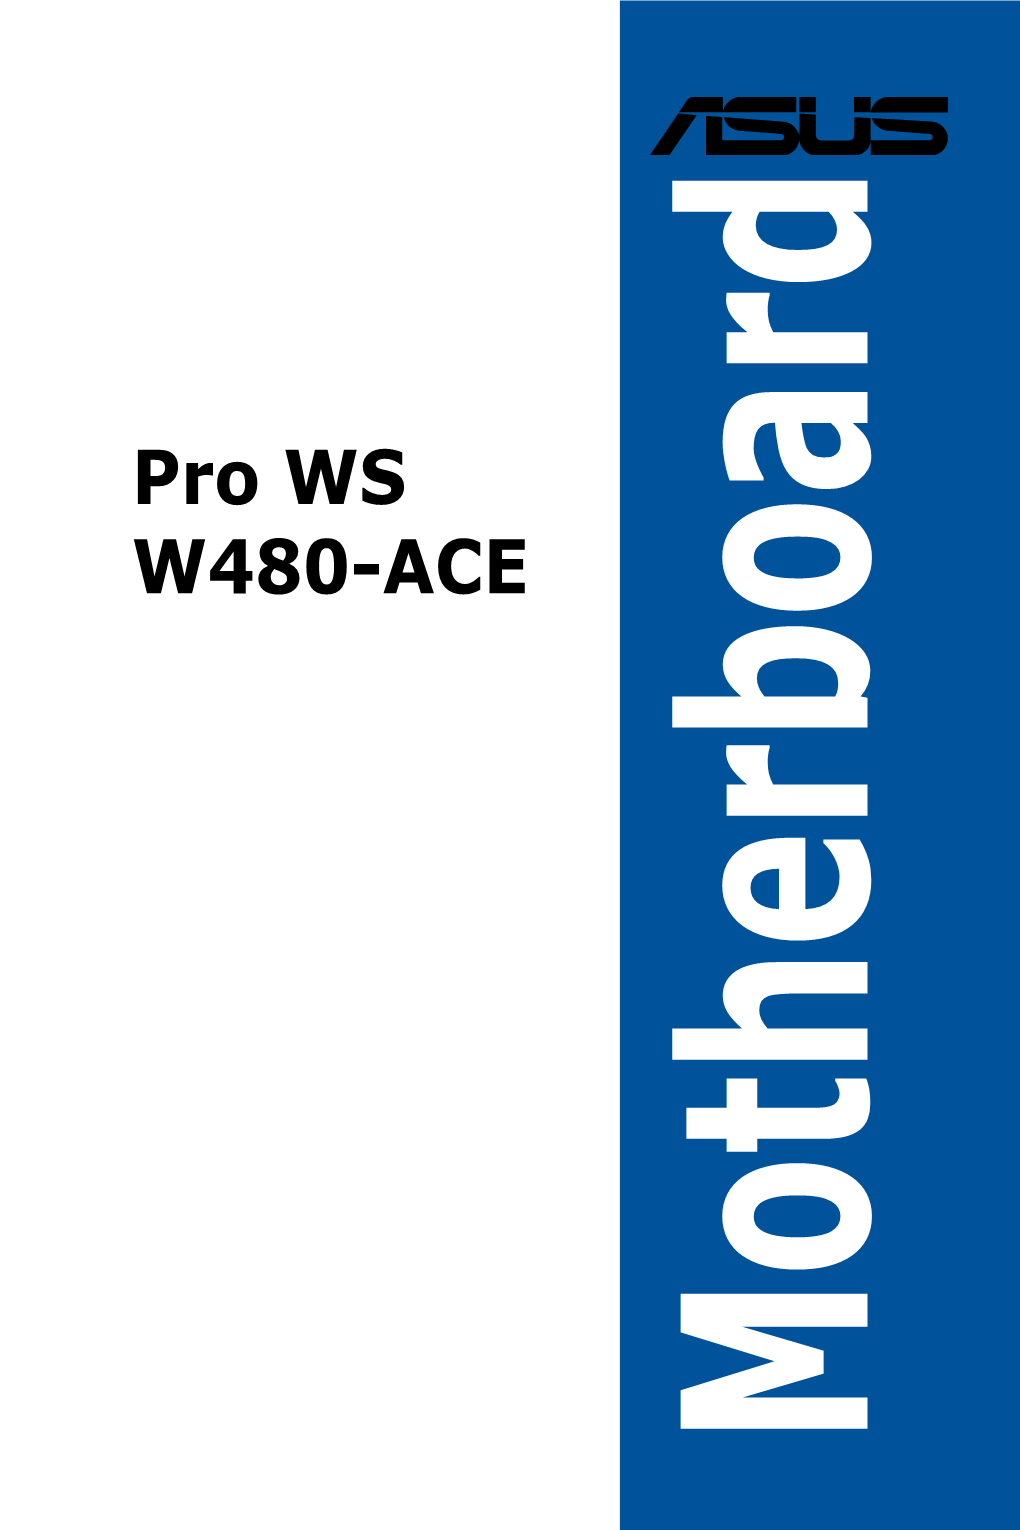 Pro WS W480-ACE Specifications Summary